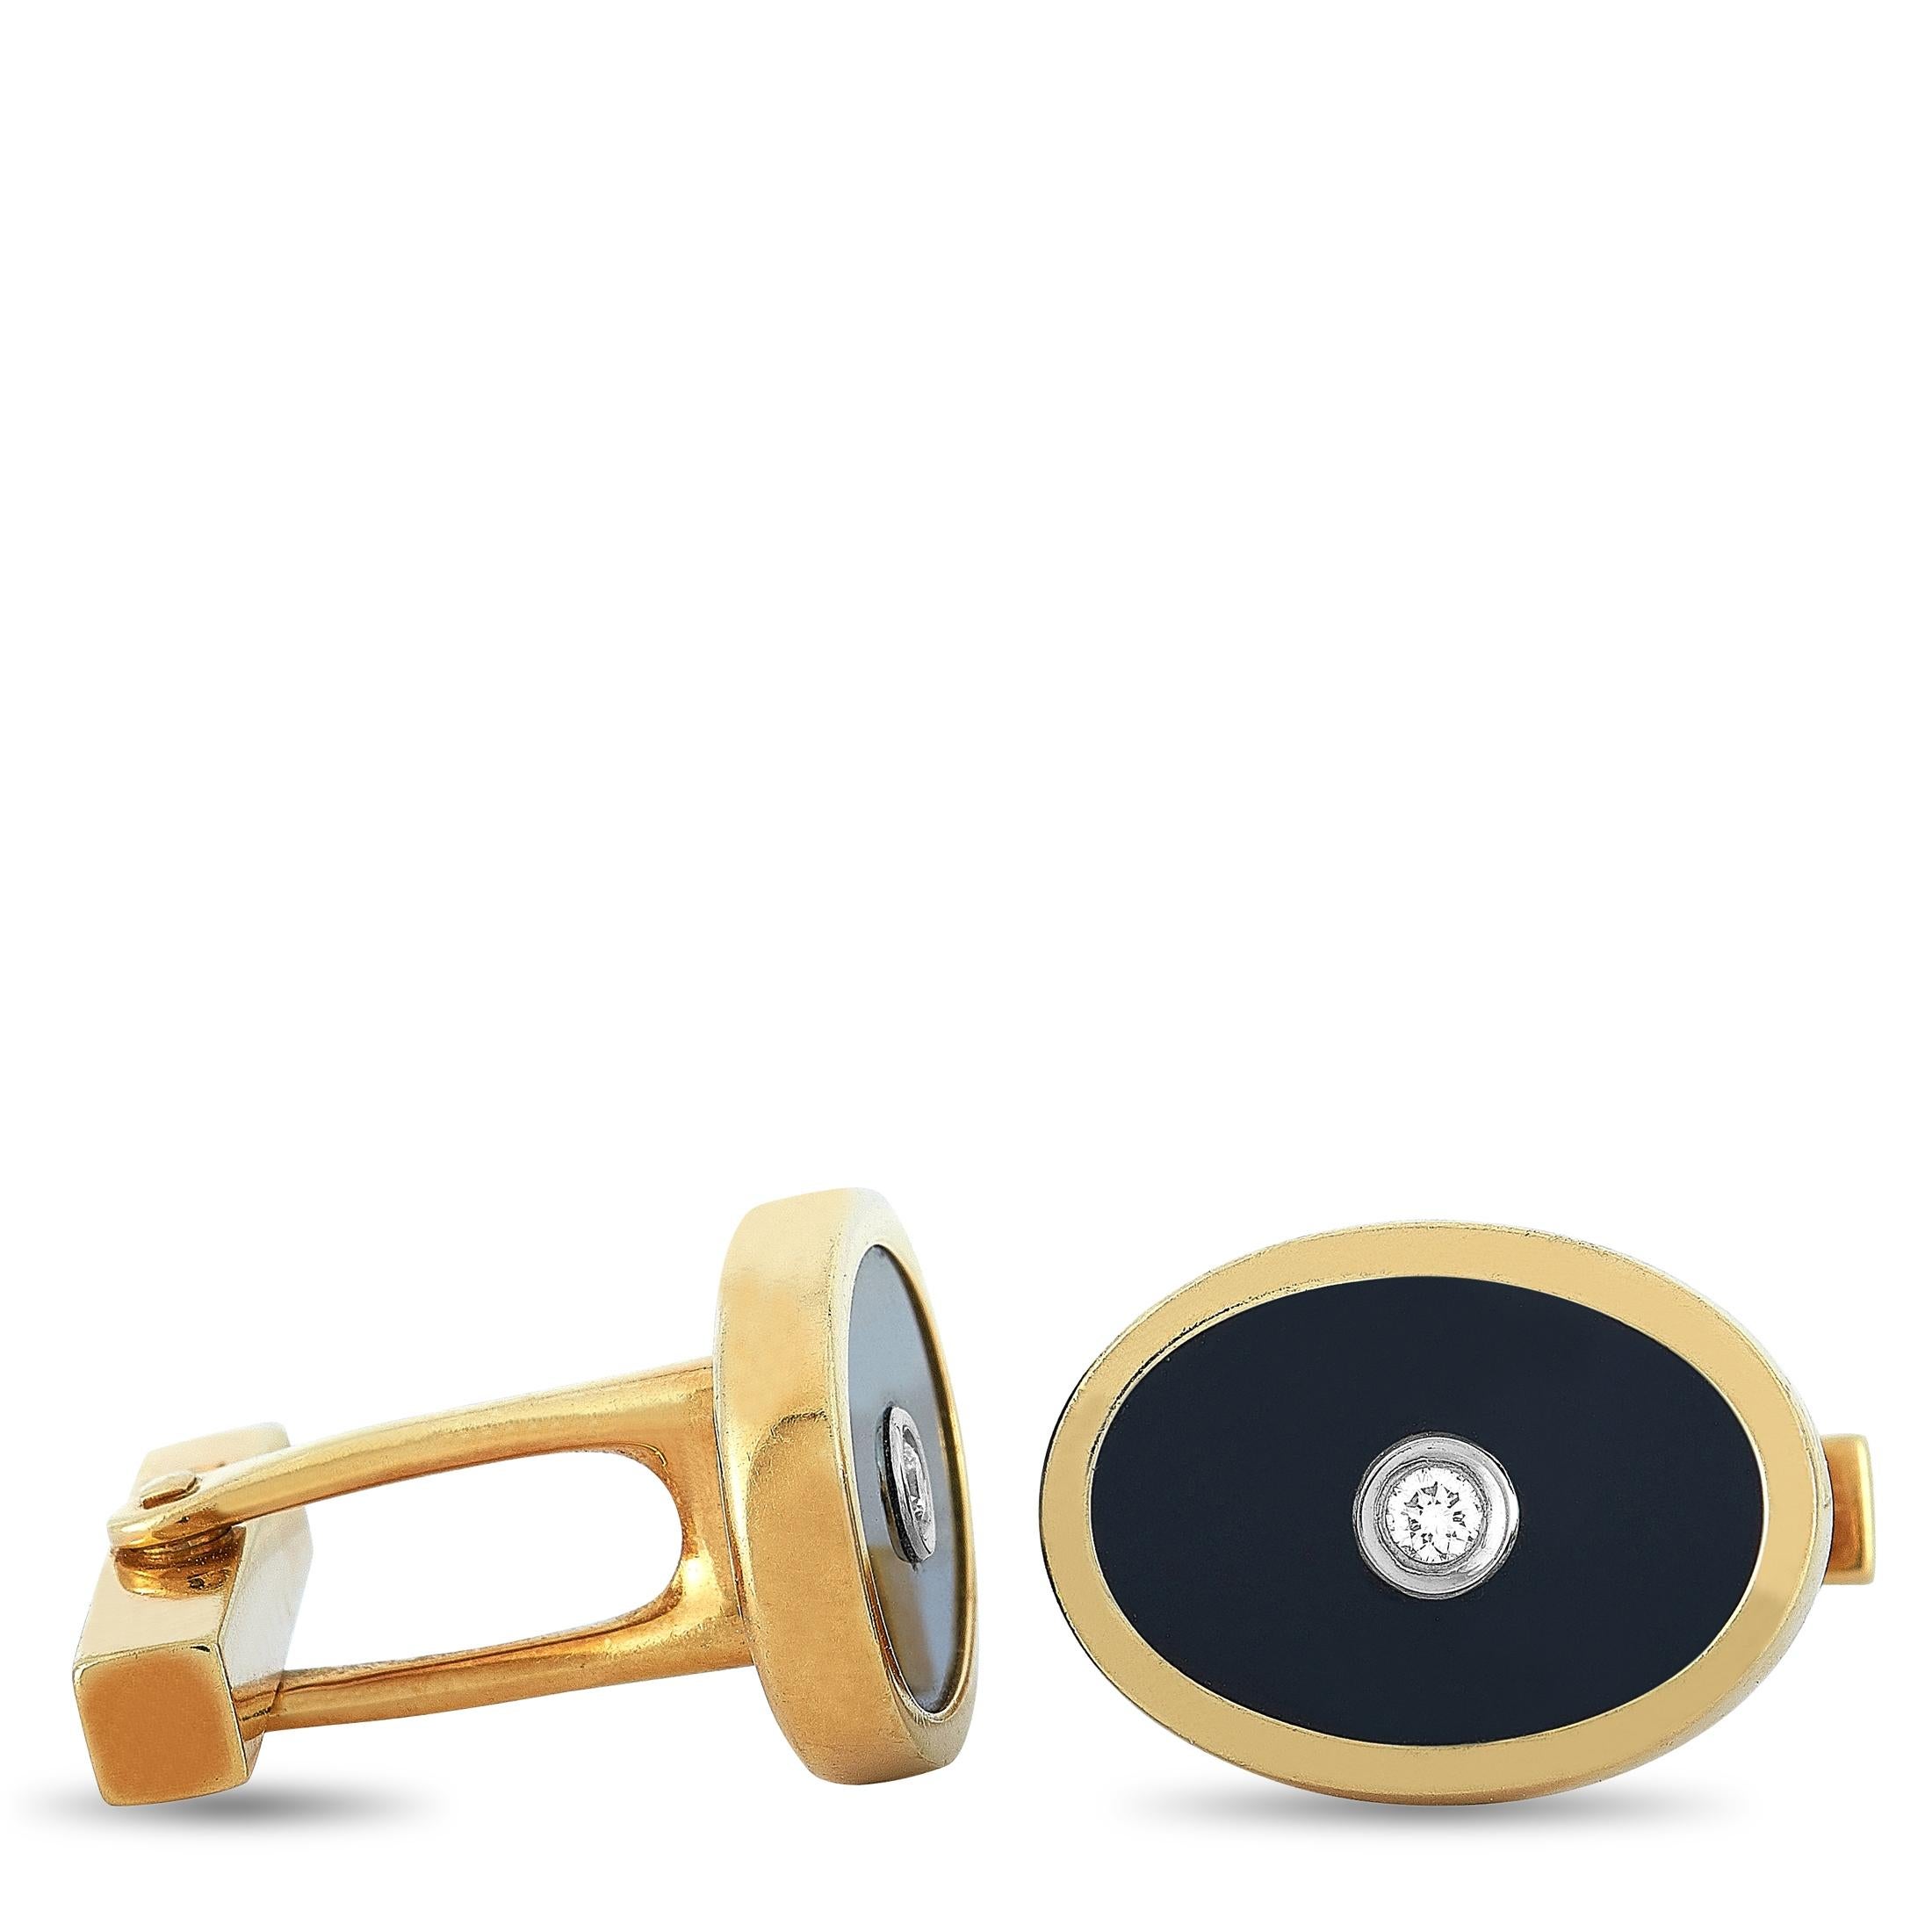 These Tiffany & Co. cufflinks are made of 18K yellow gold and set with onyxes and two diamond stones that total 0.10 carats. The cufflinks measure 0.75” in length and 0.55” in width, and each of the two weighs 7.1 grams.
 
 The pair is offered in